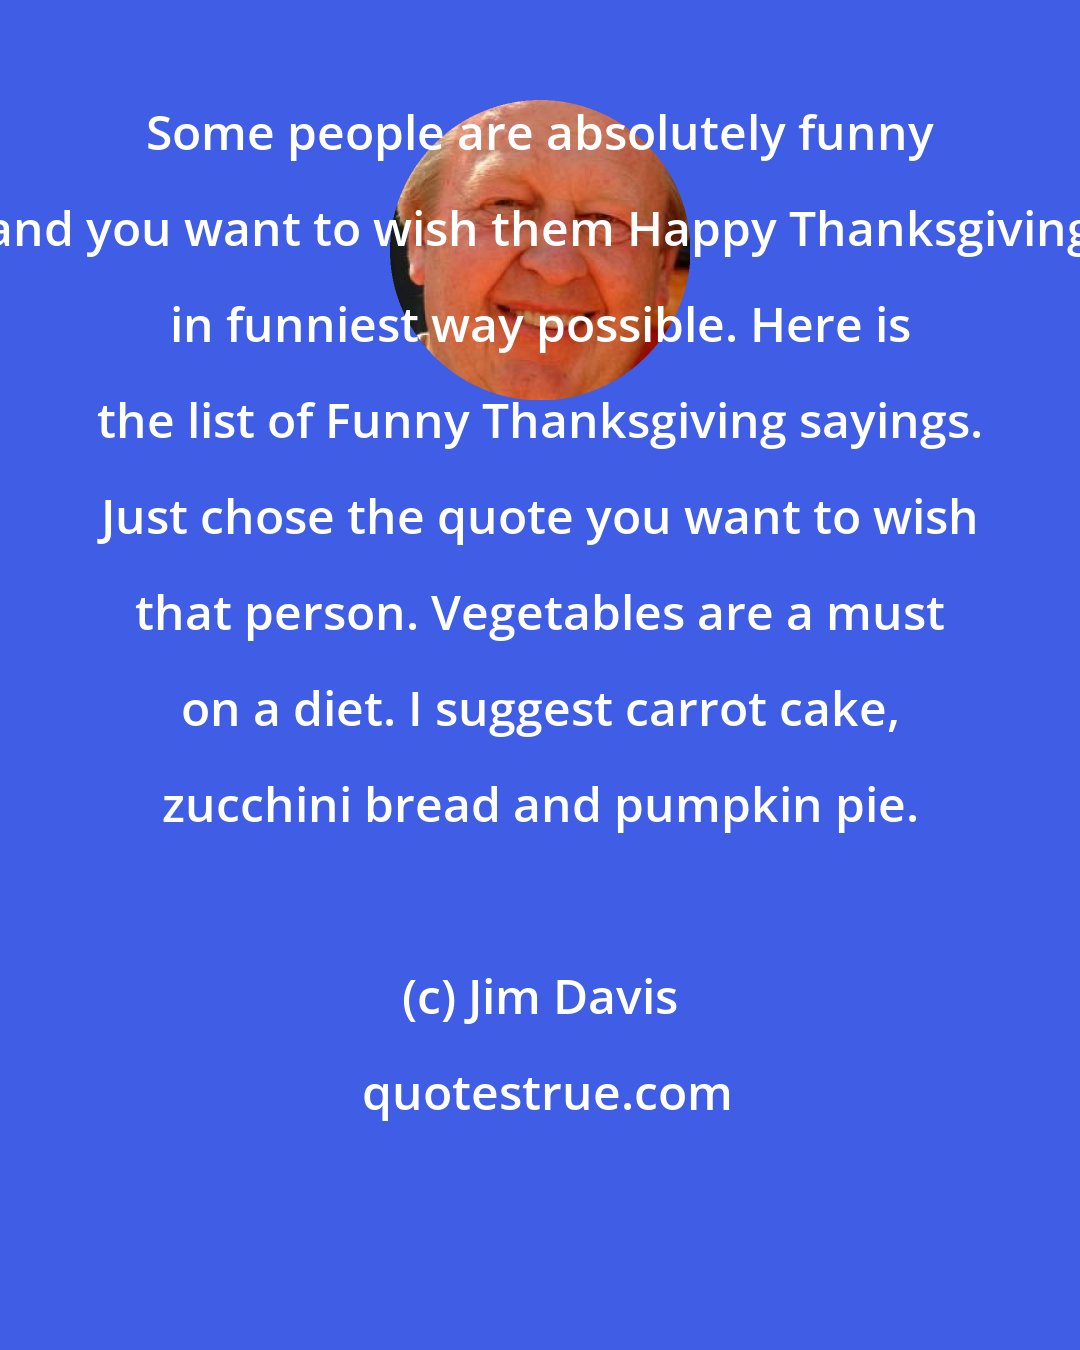 Jim Davis: Some people are absolutely funny and you want to wish them Happy Thanksgiving in funniest way possible. Here is the list of Funny Thanksgiving sayings. Just chose the quote you want to wish that person. Vegetables are a must on a diet. I suggest carrot cake, zucchini bread and pumpkin pie.